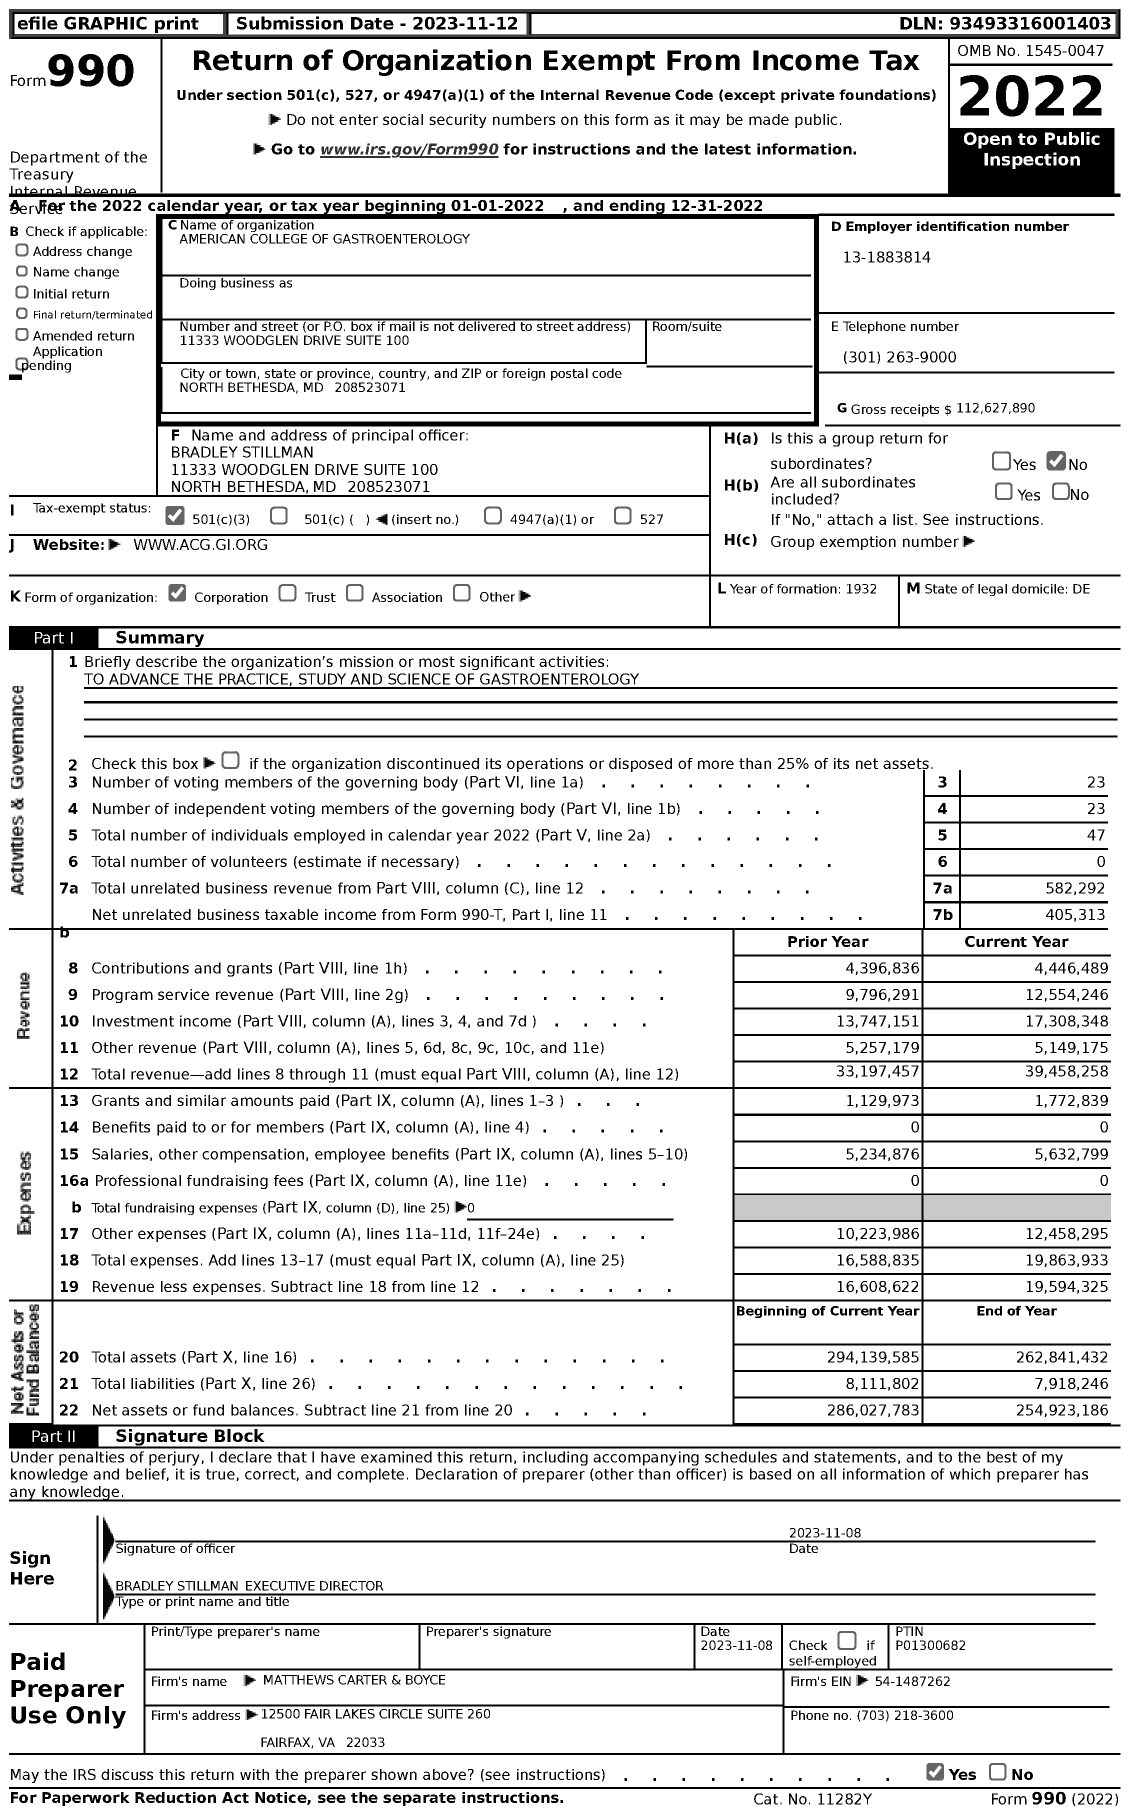 Image of first page of 2022 Form 990 for American College of Gastroenterology (ACG)